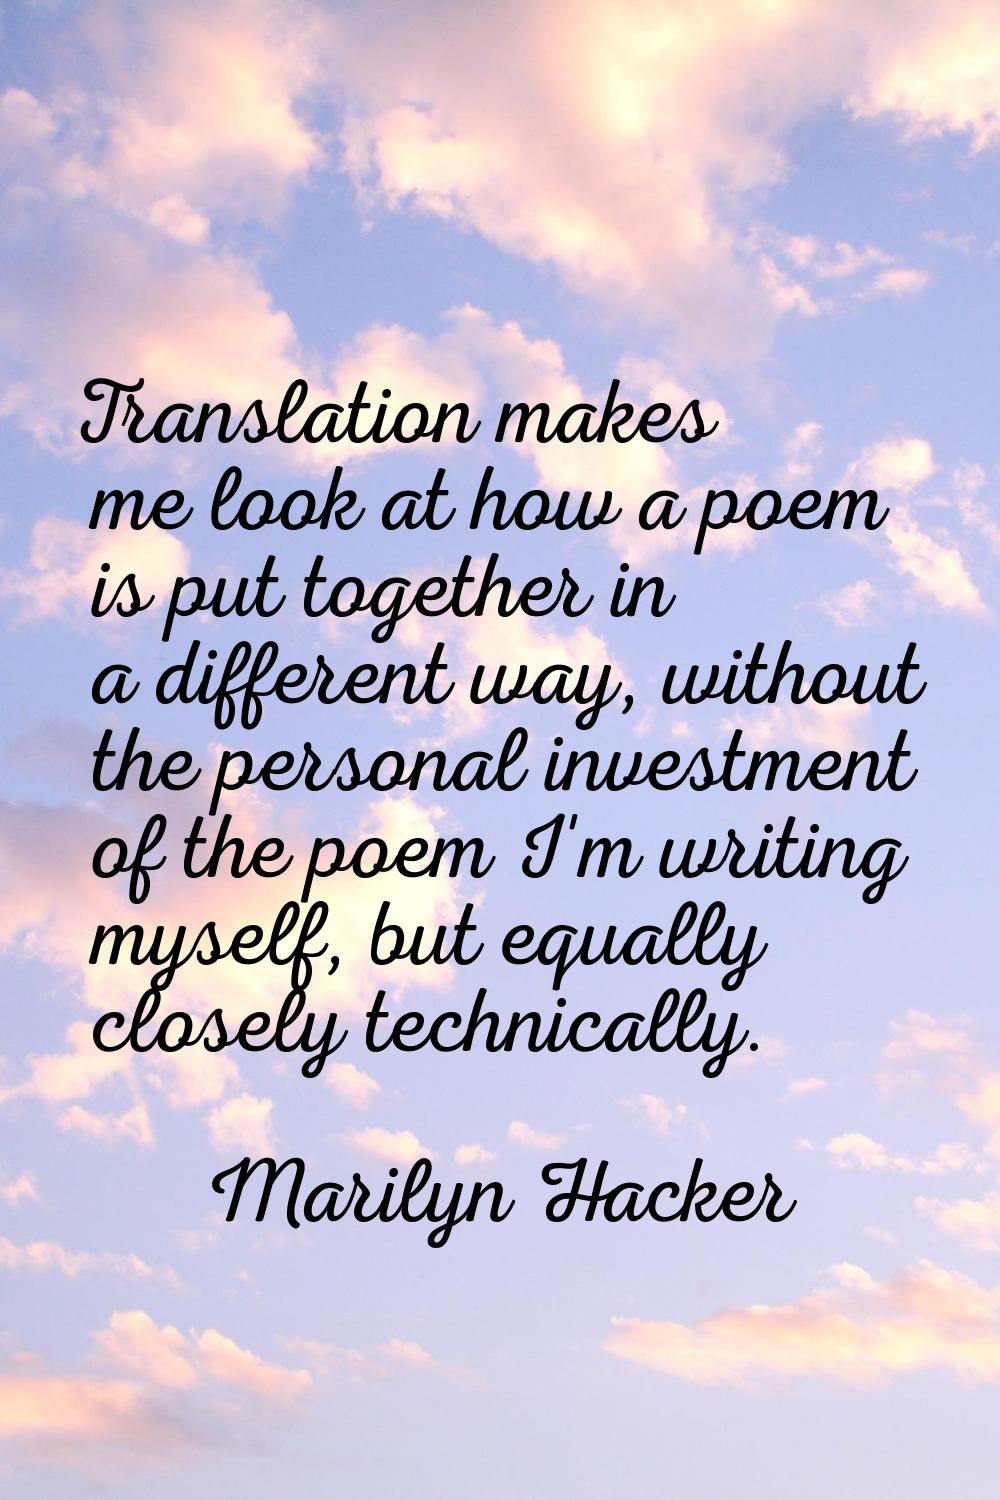 Translation makes me look at how a poem is put together in a different way, without the personal in